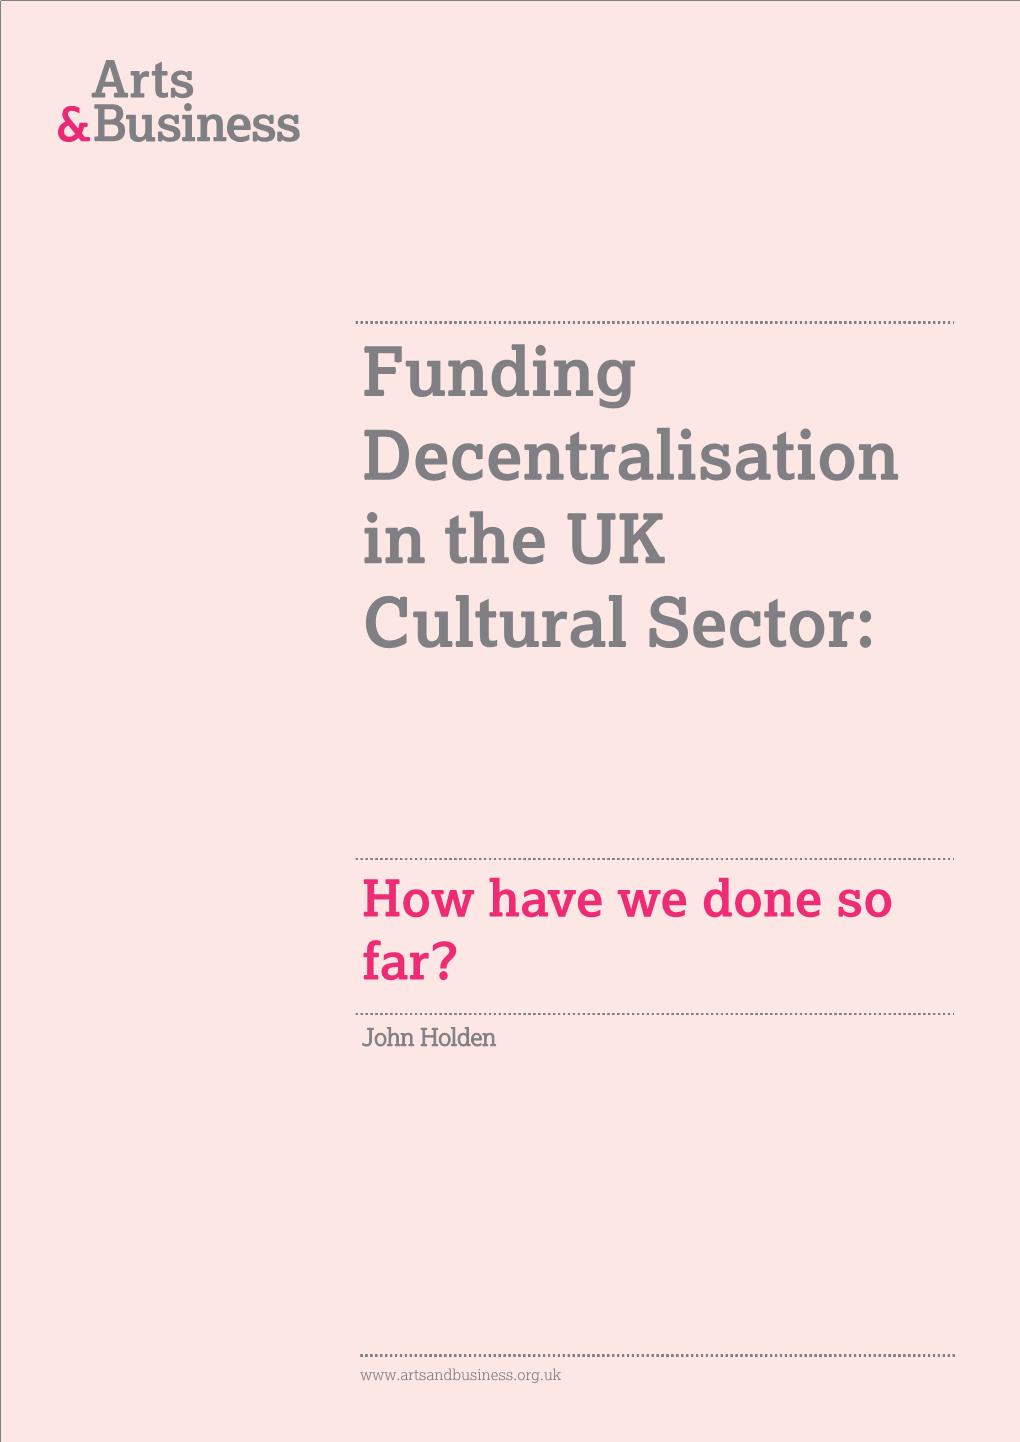 Funding Decentralisation in the UK Cultural Sector